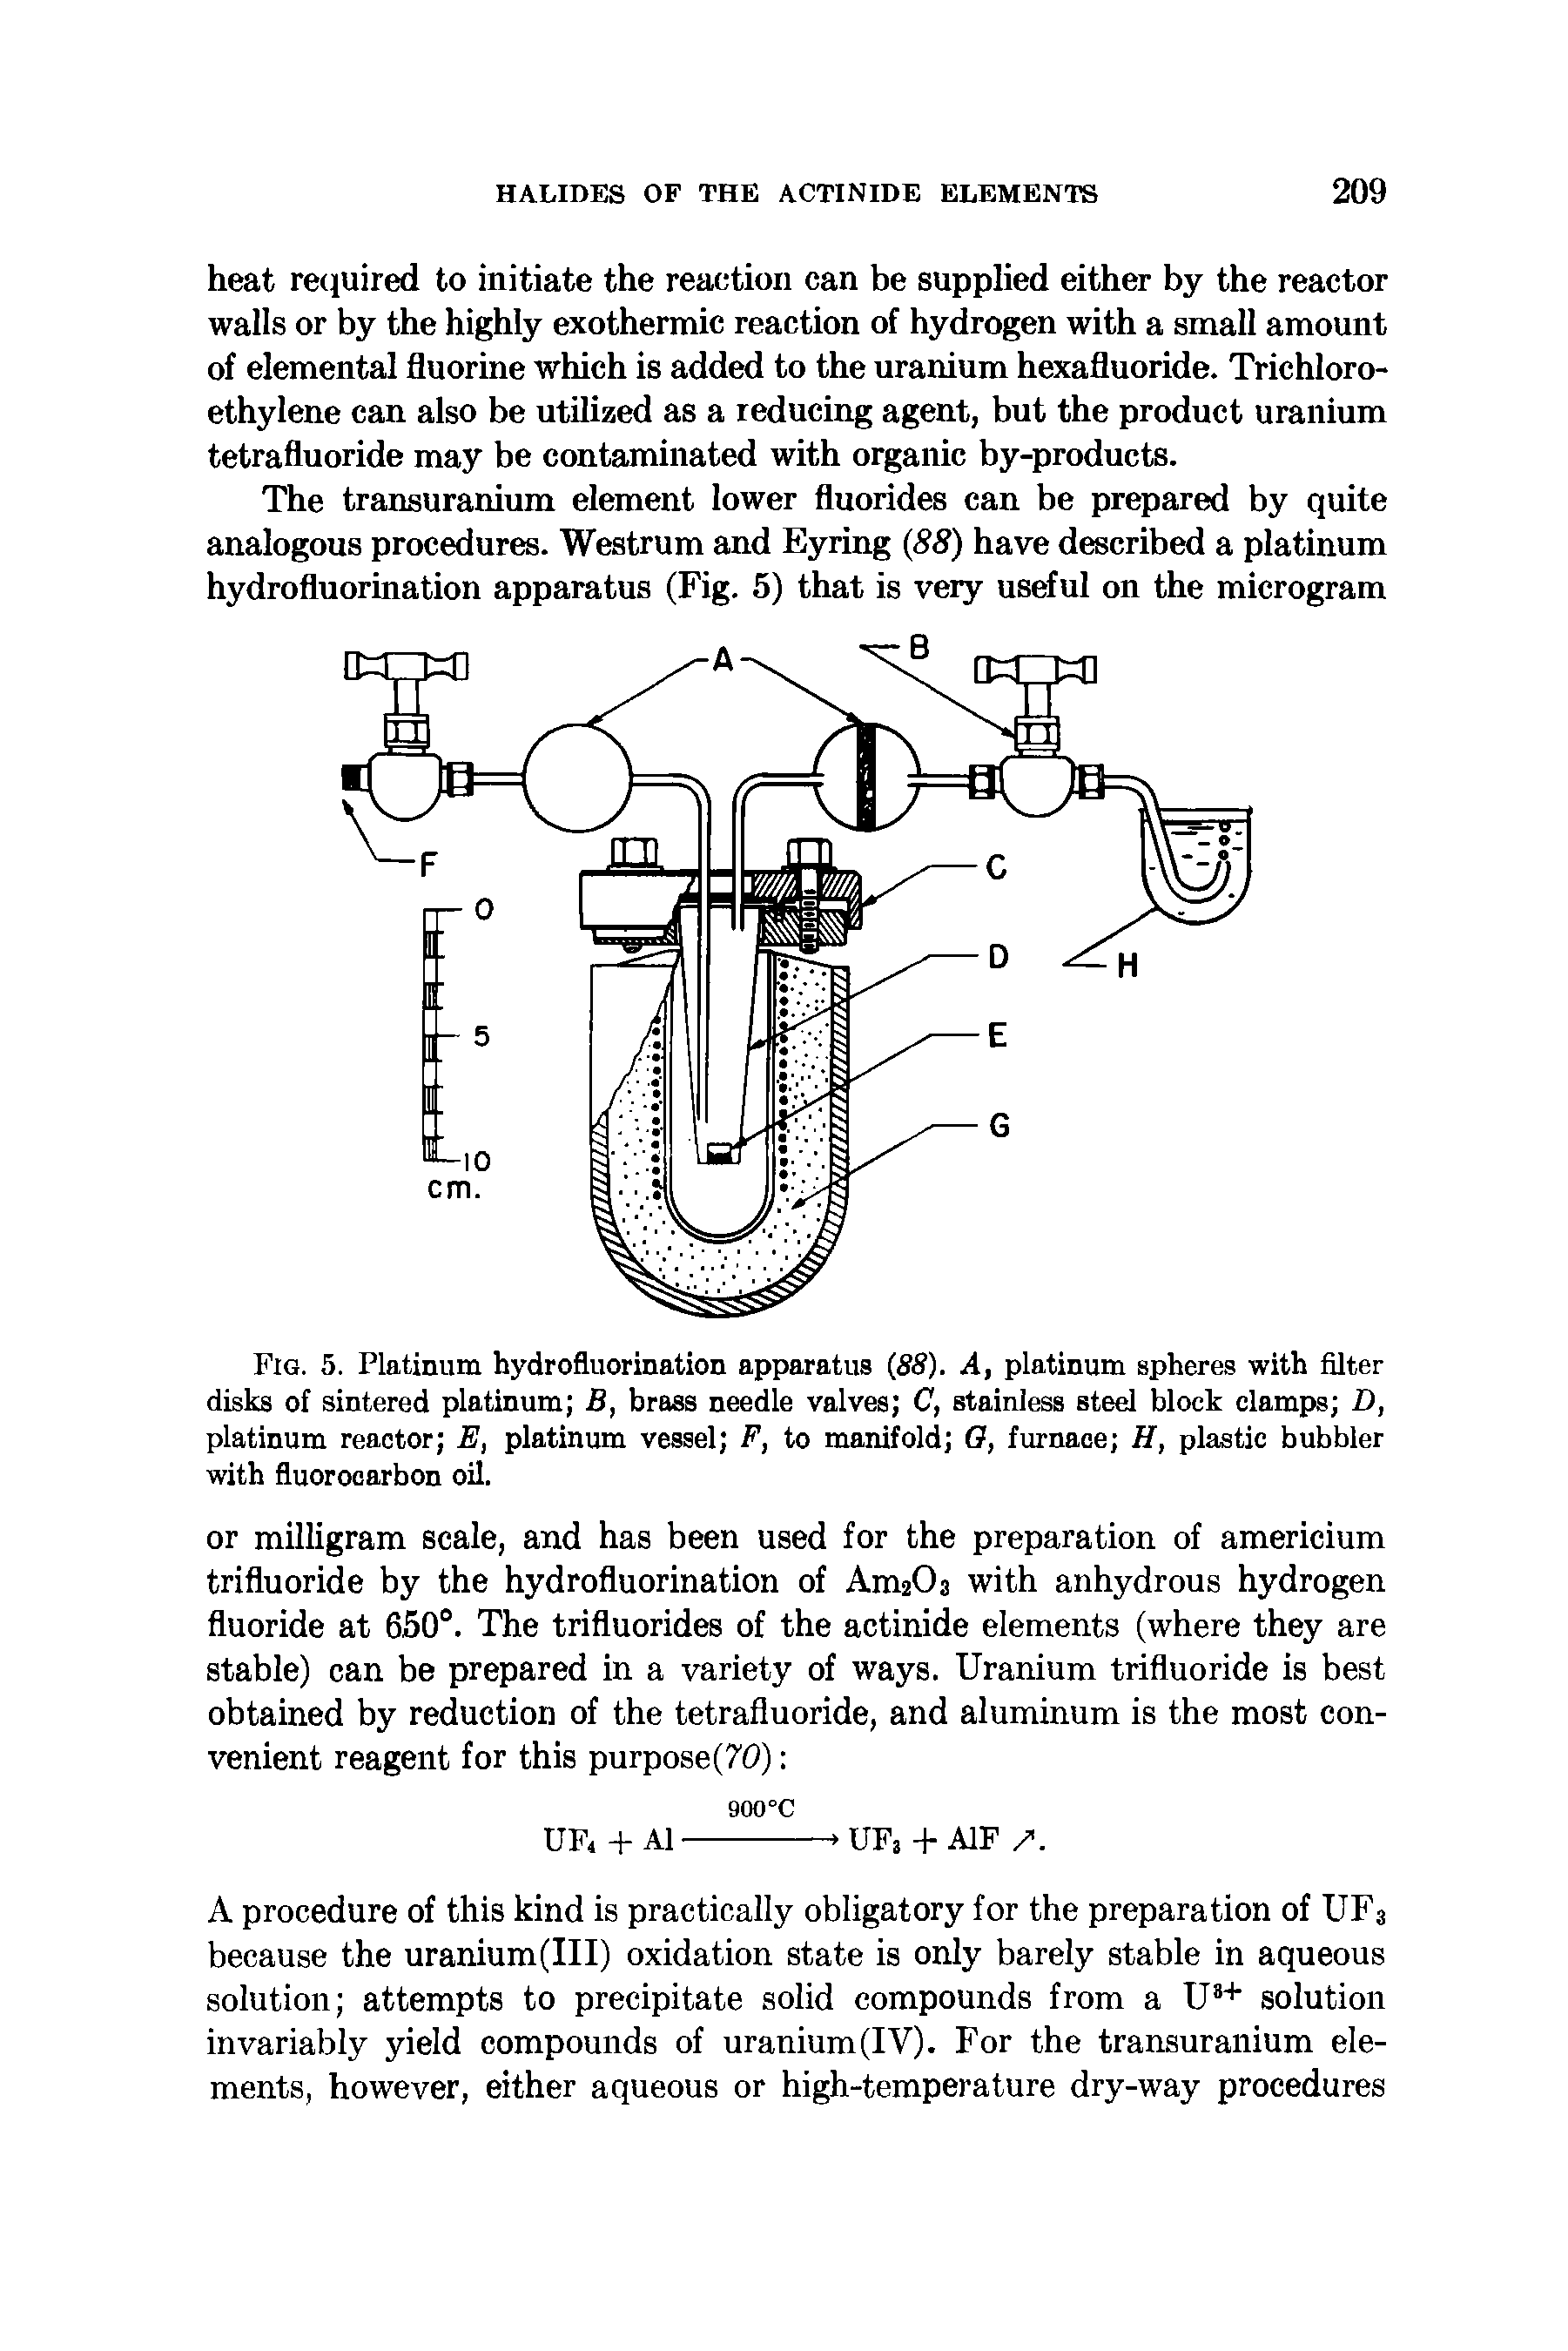 Fig. 5. Platinum hydrofluorination apparatus (88). A, platinum spheres with filter disks of sintered platinum B, brass needle valves C, stainless steel block clamps D, platinum reactor E, platinum vessel F, to manifold O, furnace H, plastic bubbler with fluorocarbon oil.